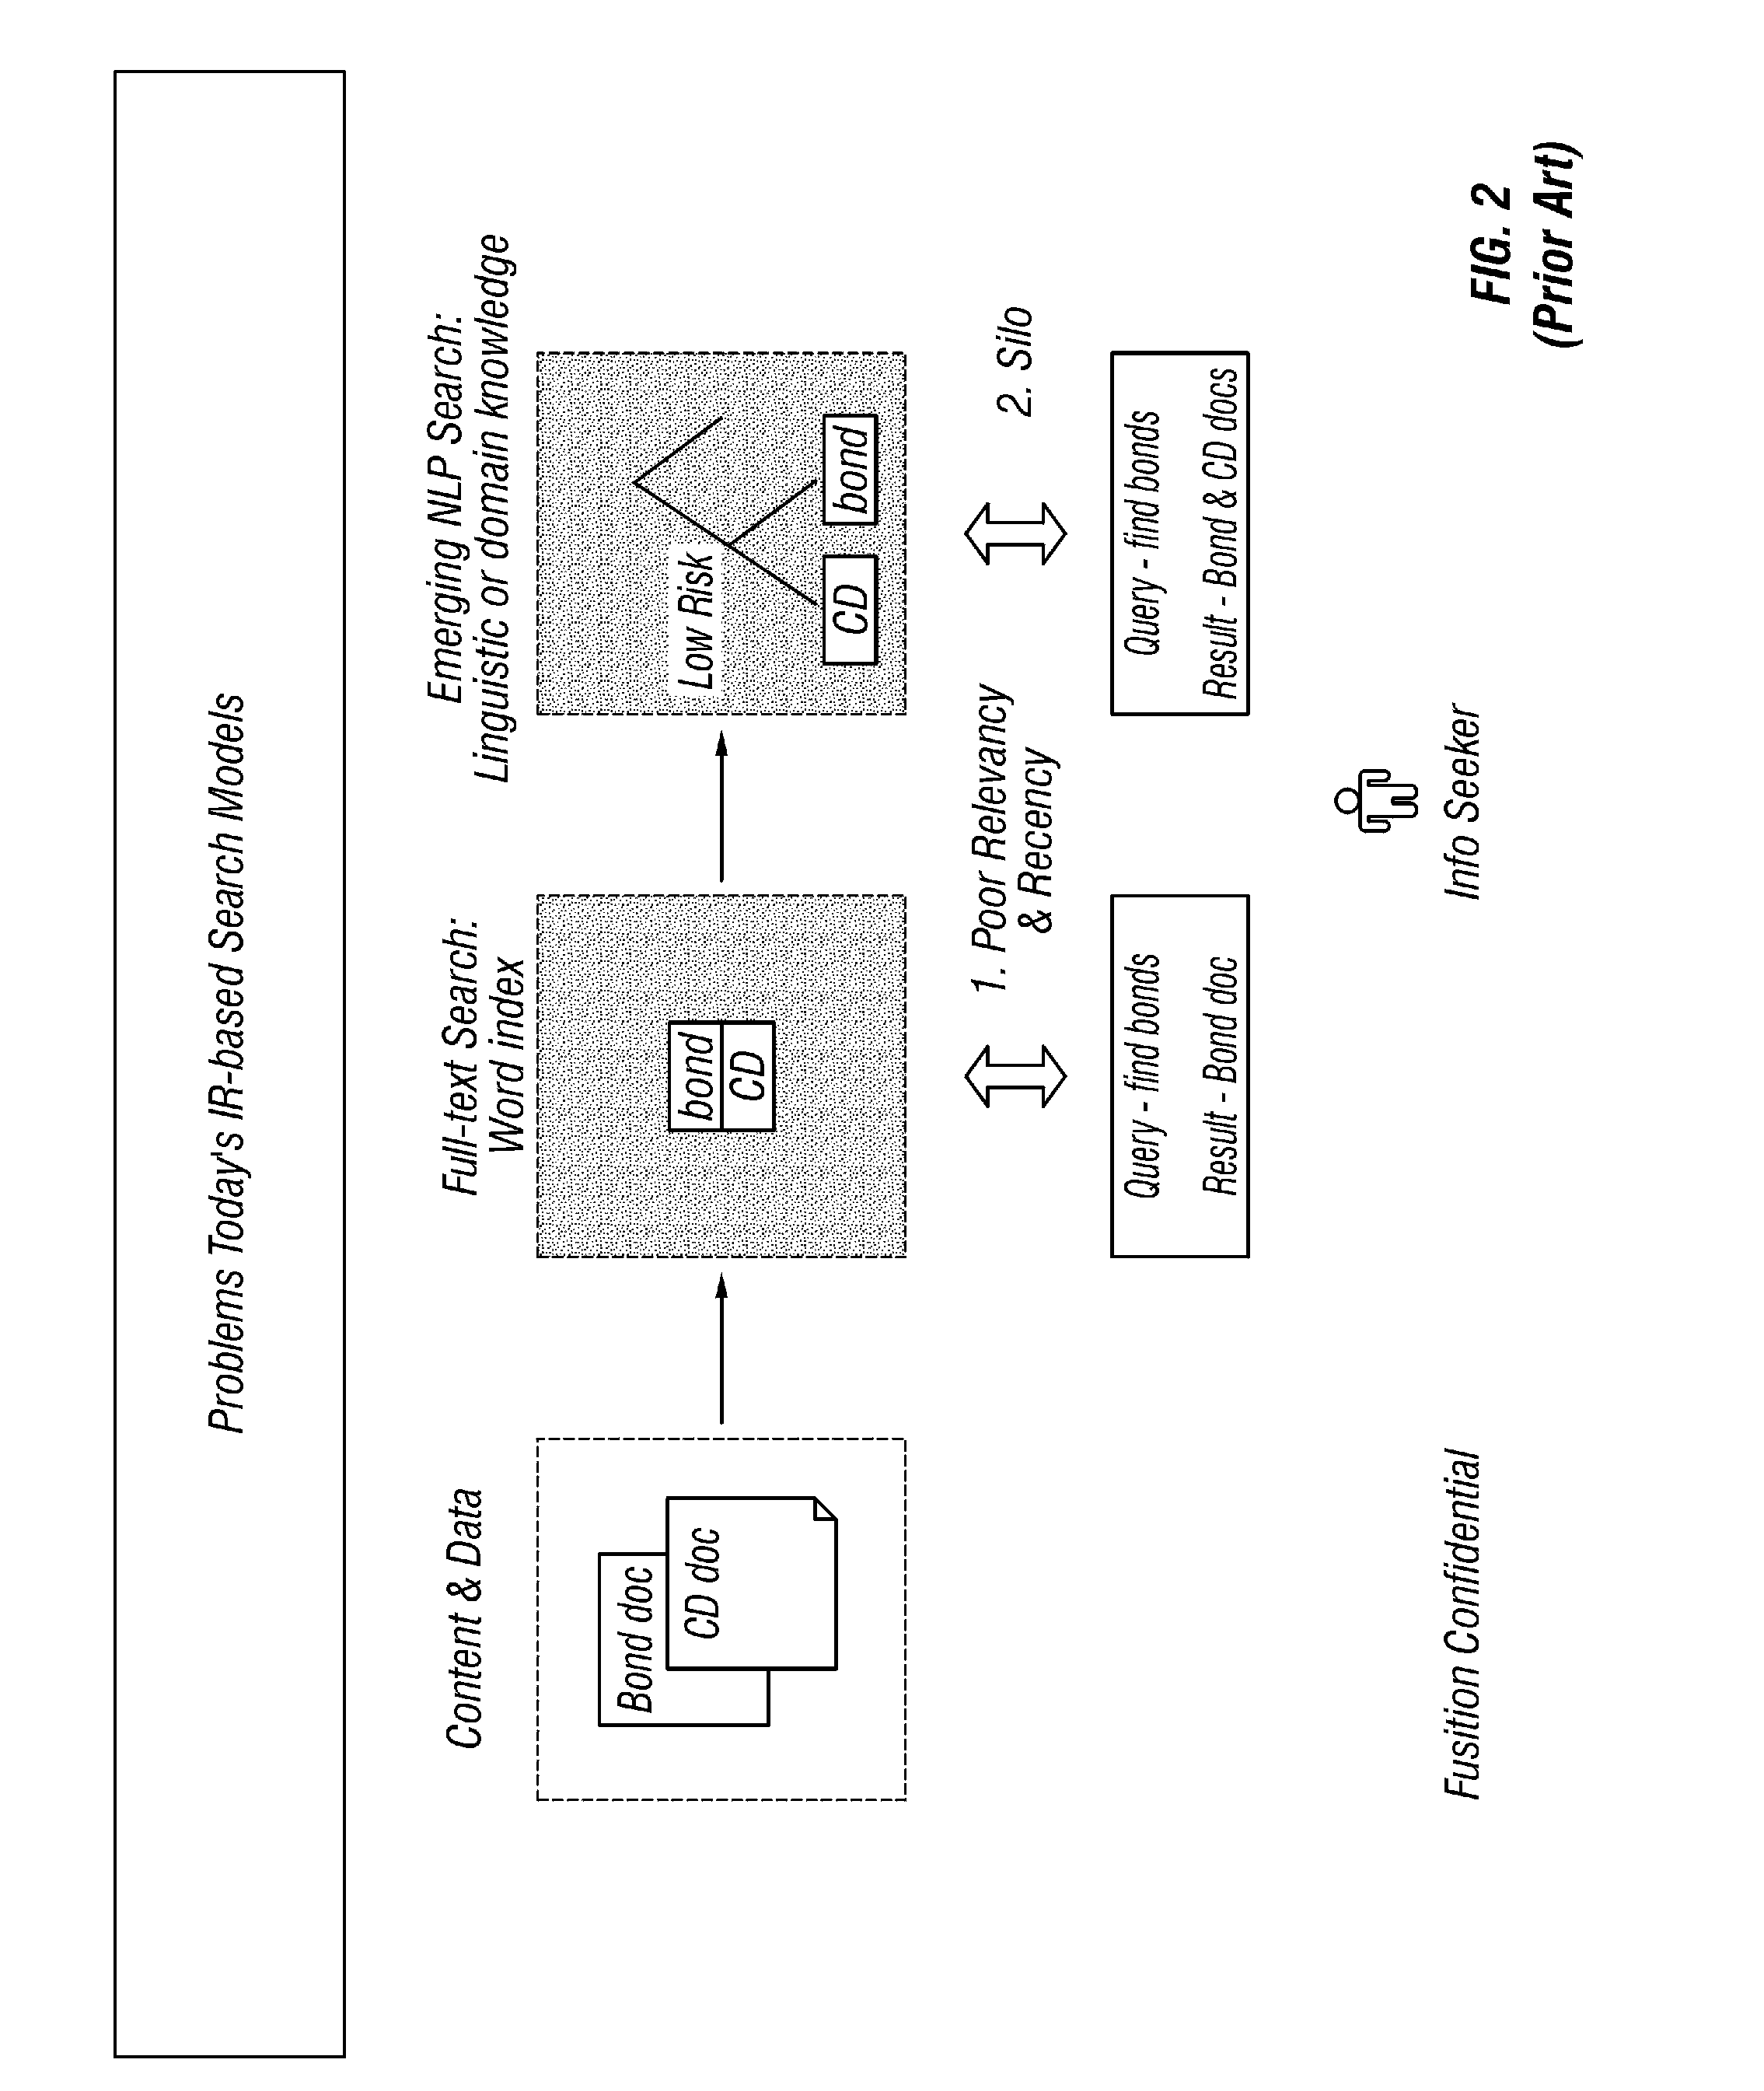 Method and apparatus for determining peer groups based upon observed usage patterns